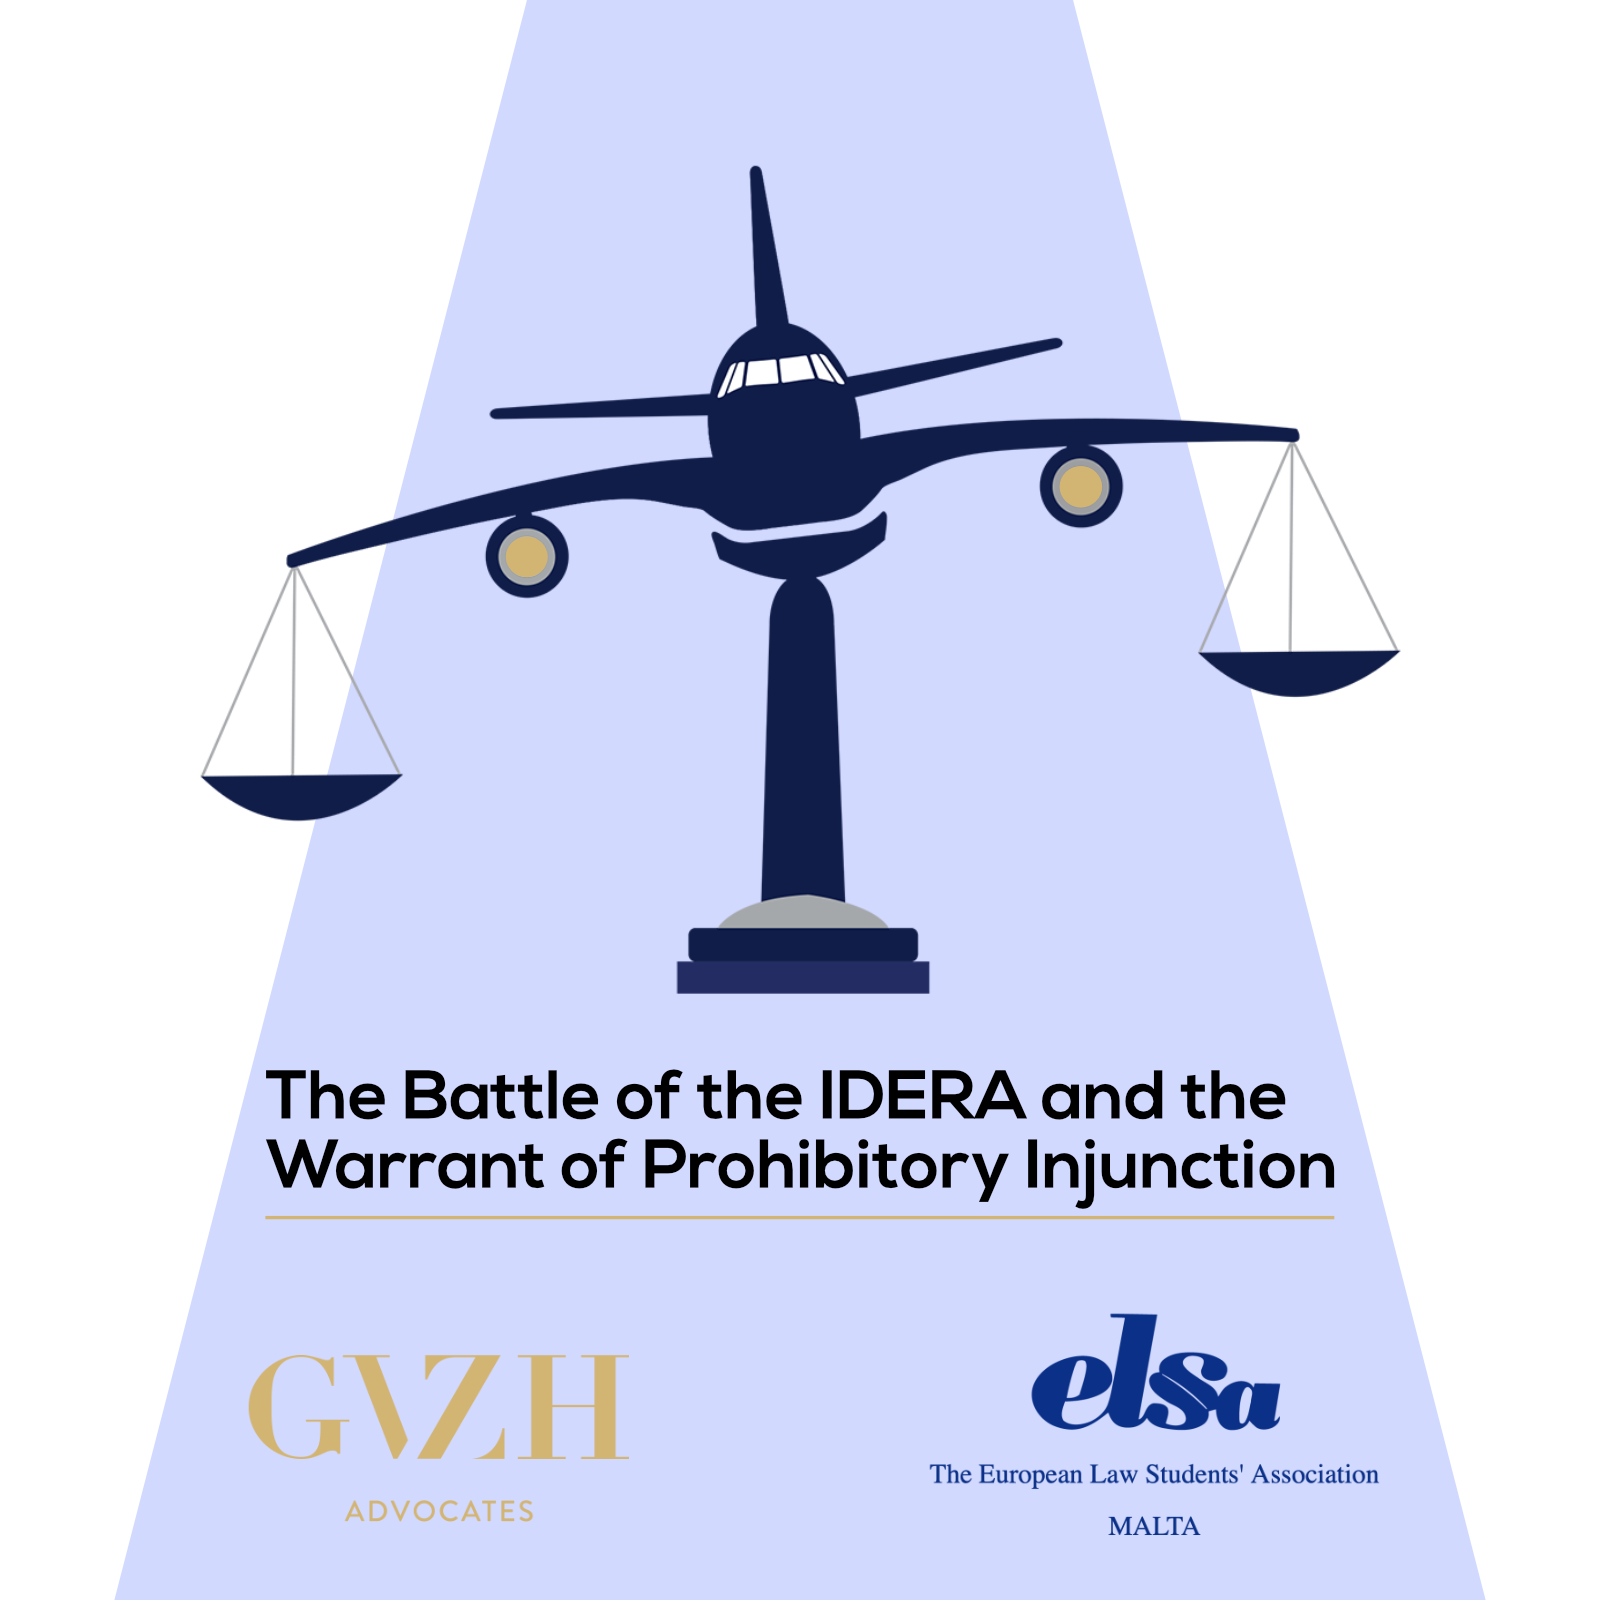 The Battle of the IDERA and the Warrant of Prohibitory Injunction